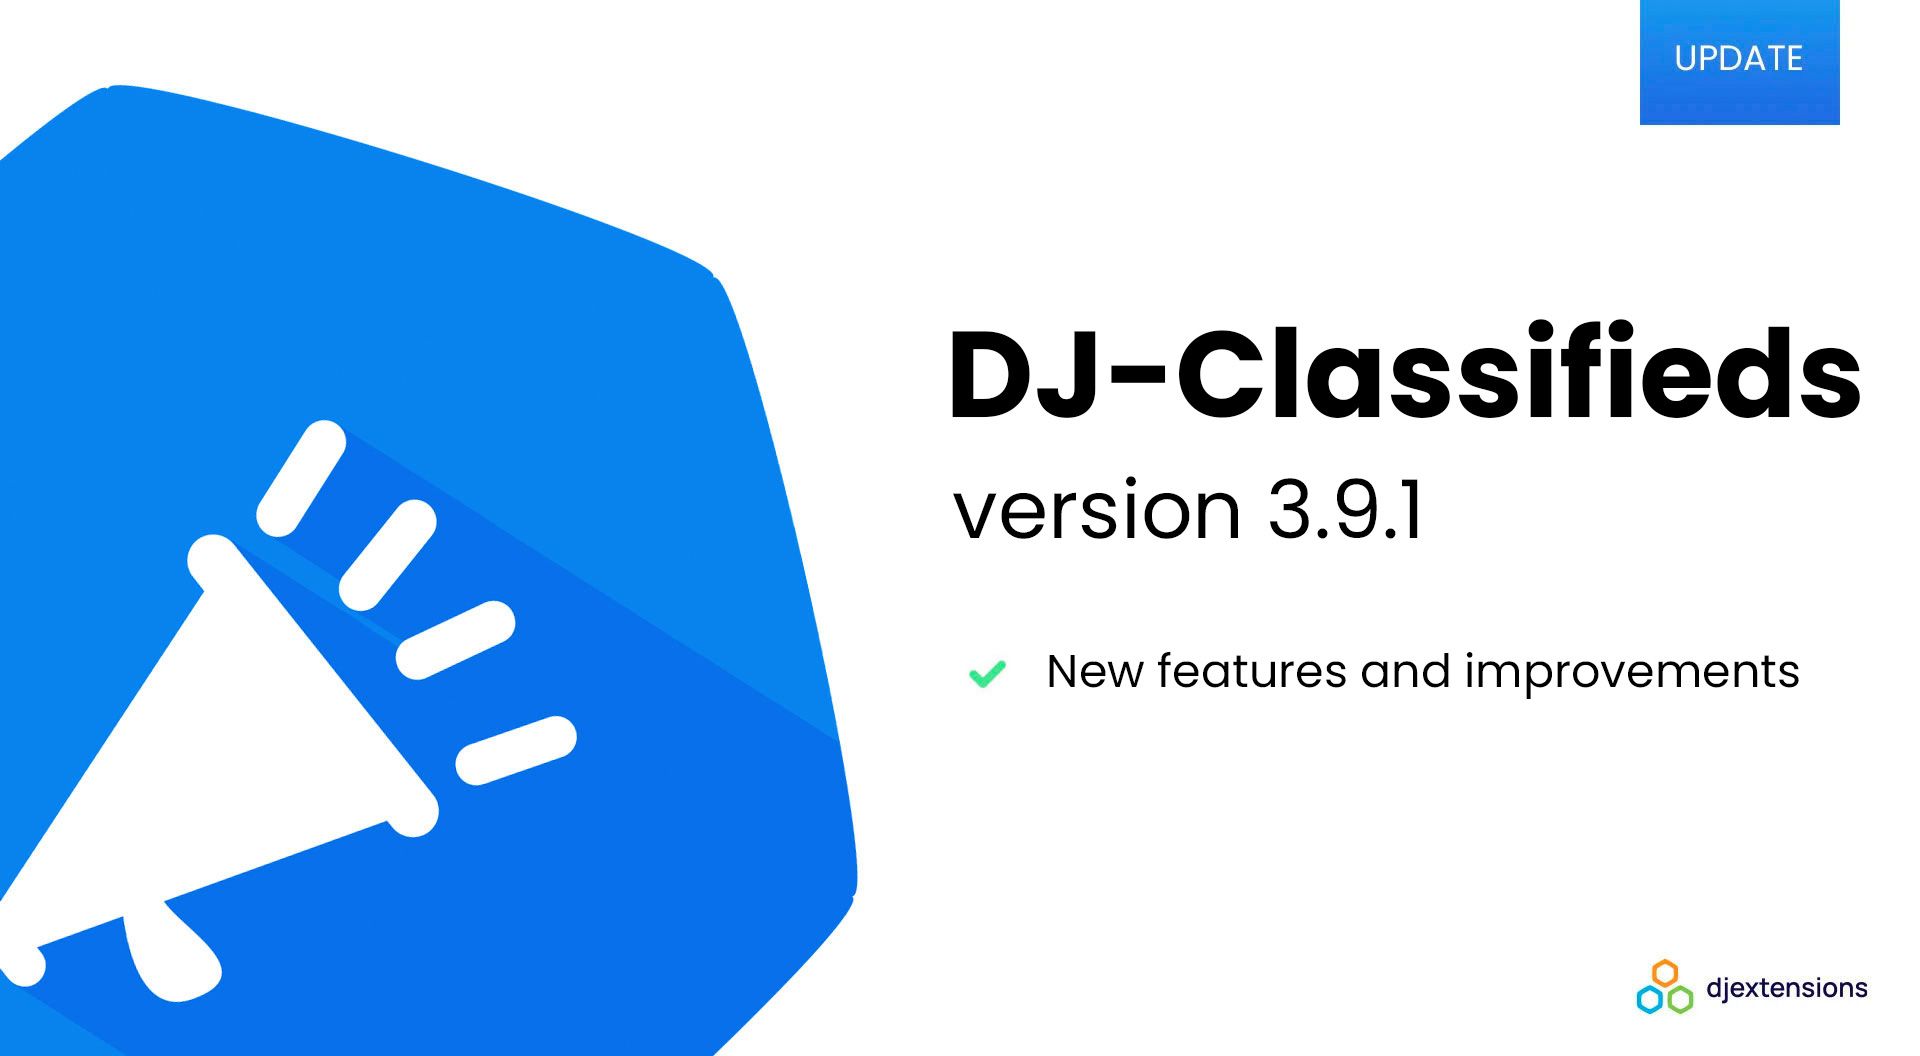 DJ-Classifieds 3.9.1 update introduces new features